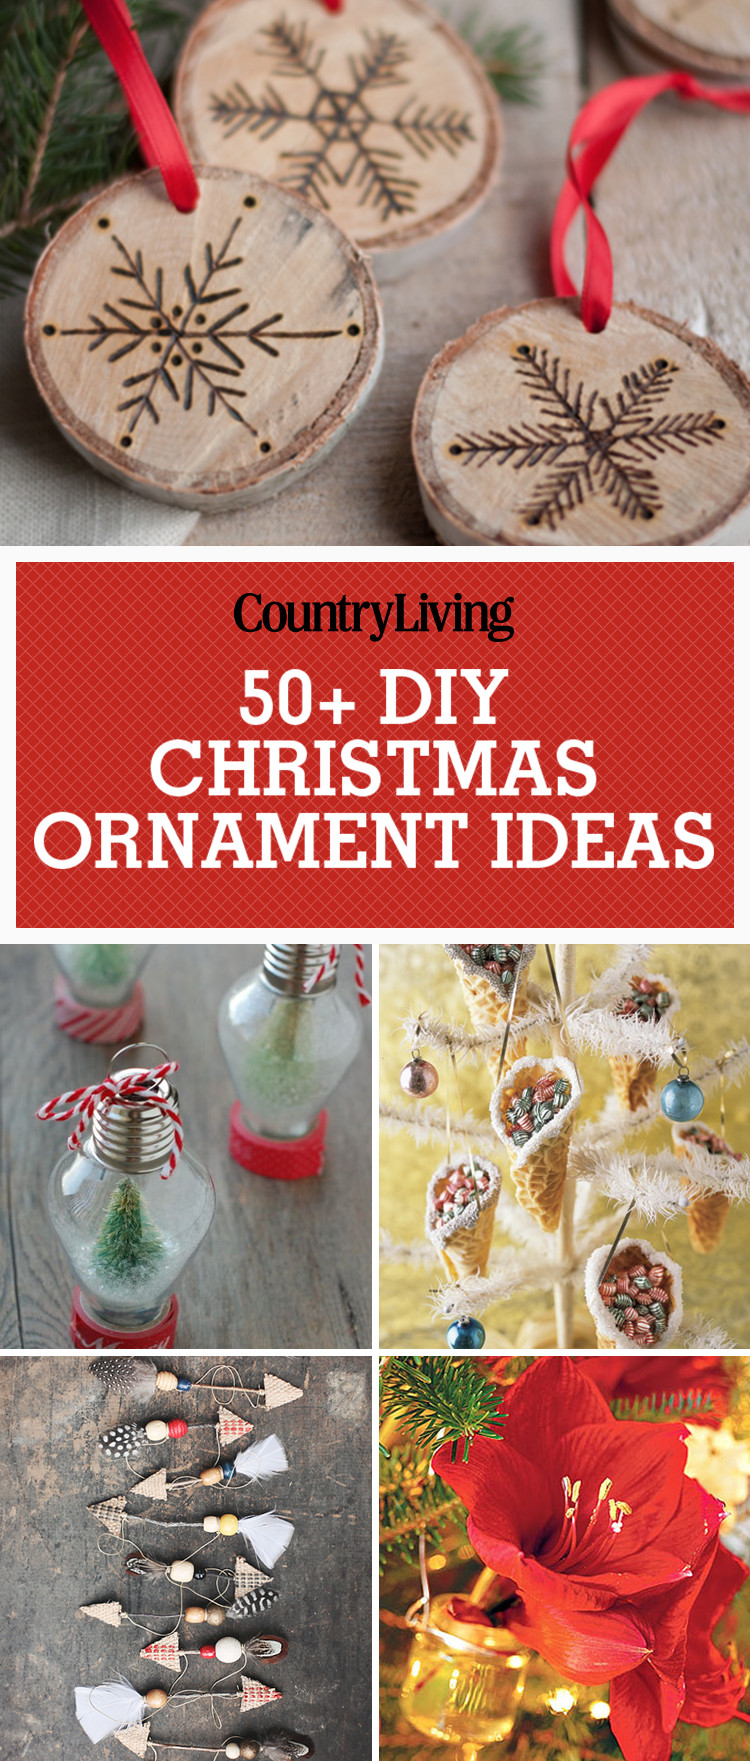 DIY Christmas Ornaments As Gifts
 55 Homemade Christmas Ornaments DIY Crafts with